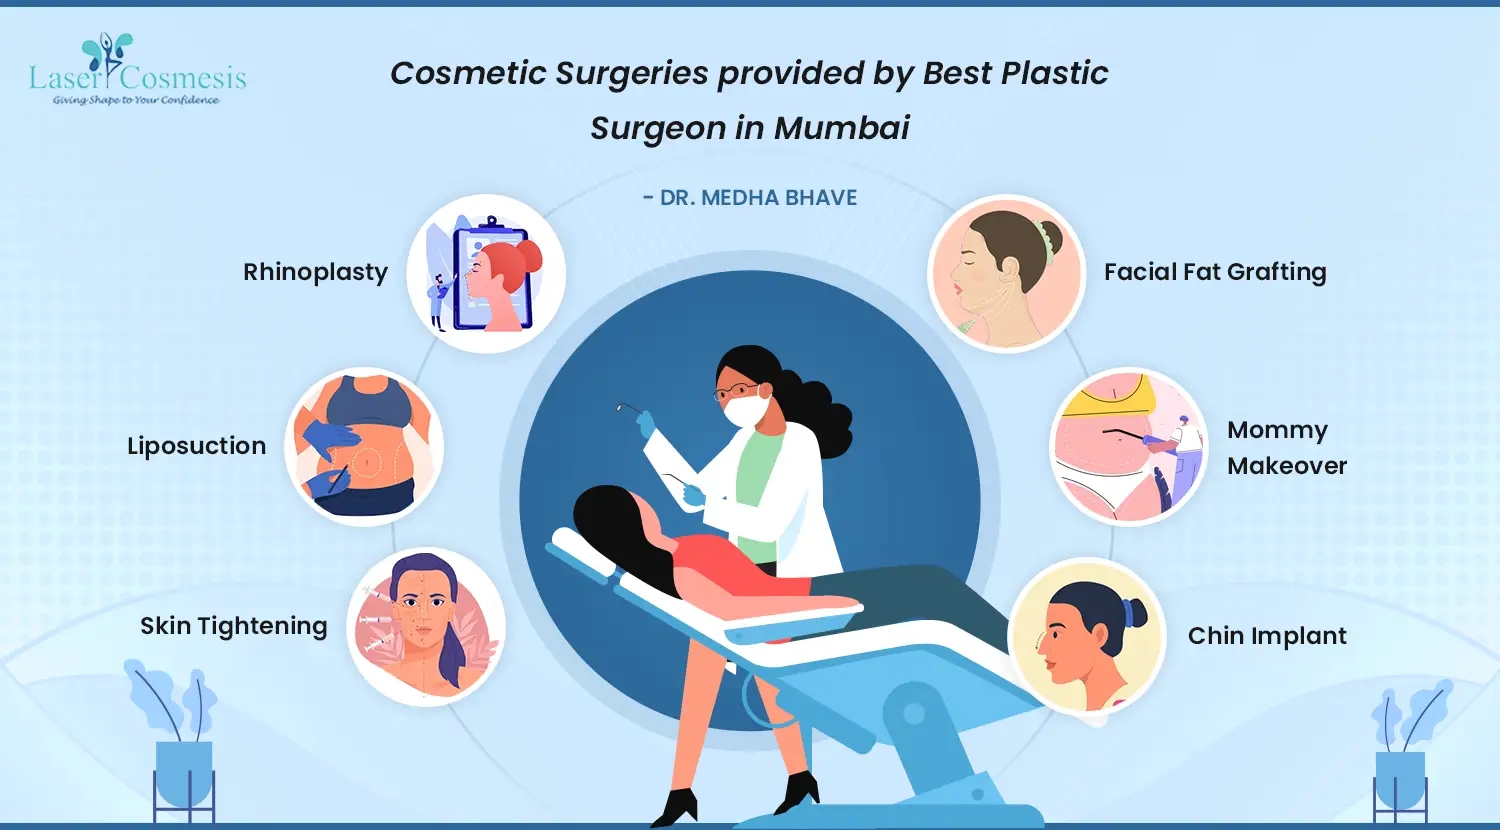 Cosmetic surgeries such as Rhinoplasty, Liposuction, Mommy Makeovers, and more are provided by the best plastic surgeon in Mumbai, Dr. Medha Bhave.